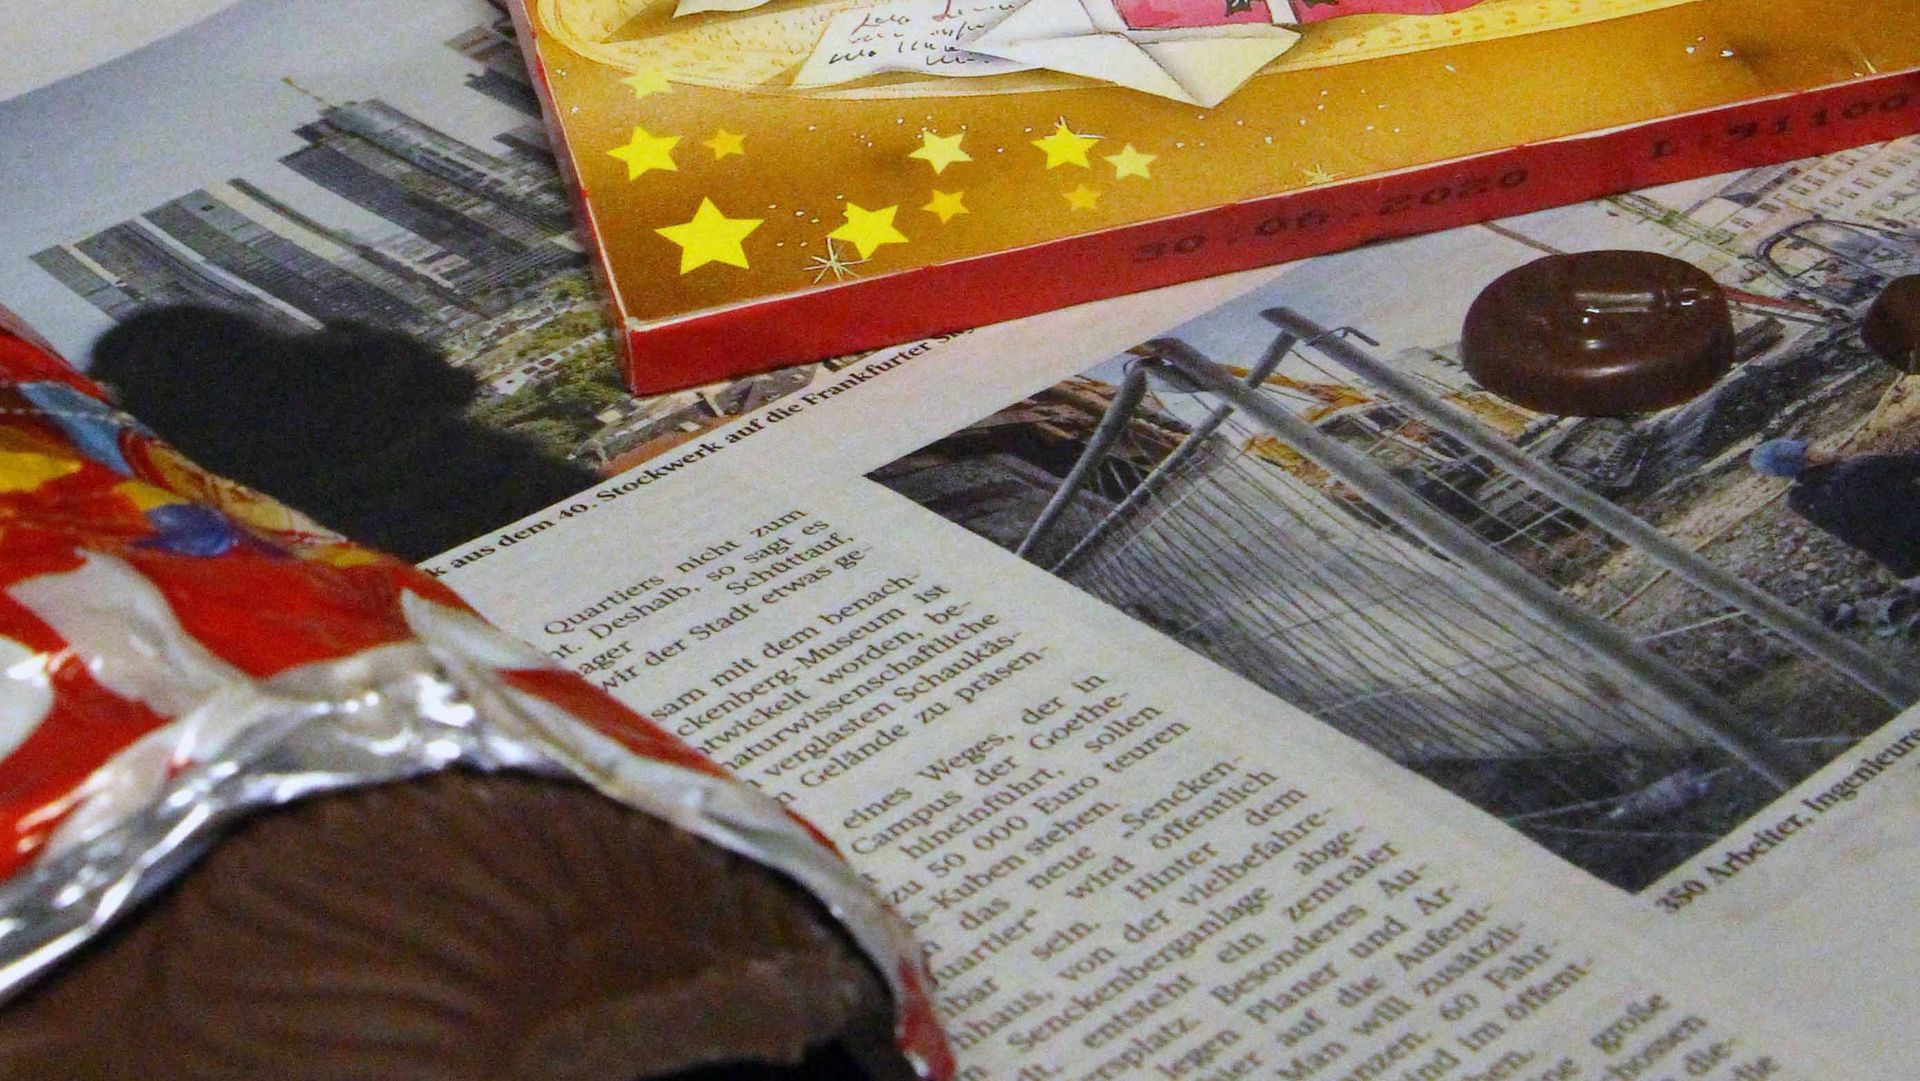 Newspaper, a half unwrapped unwrapped chocolate Father Christmas and an Advent calendar